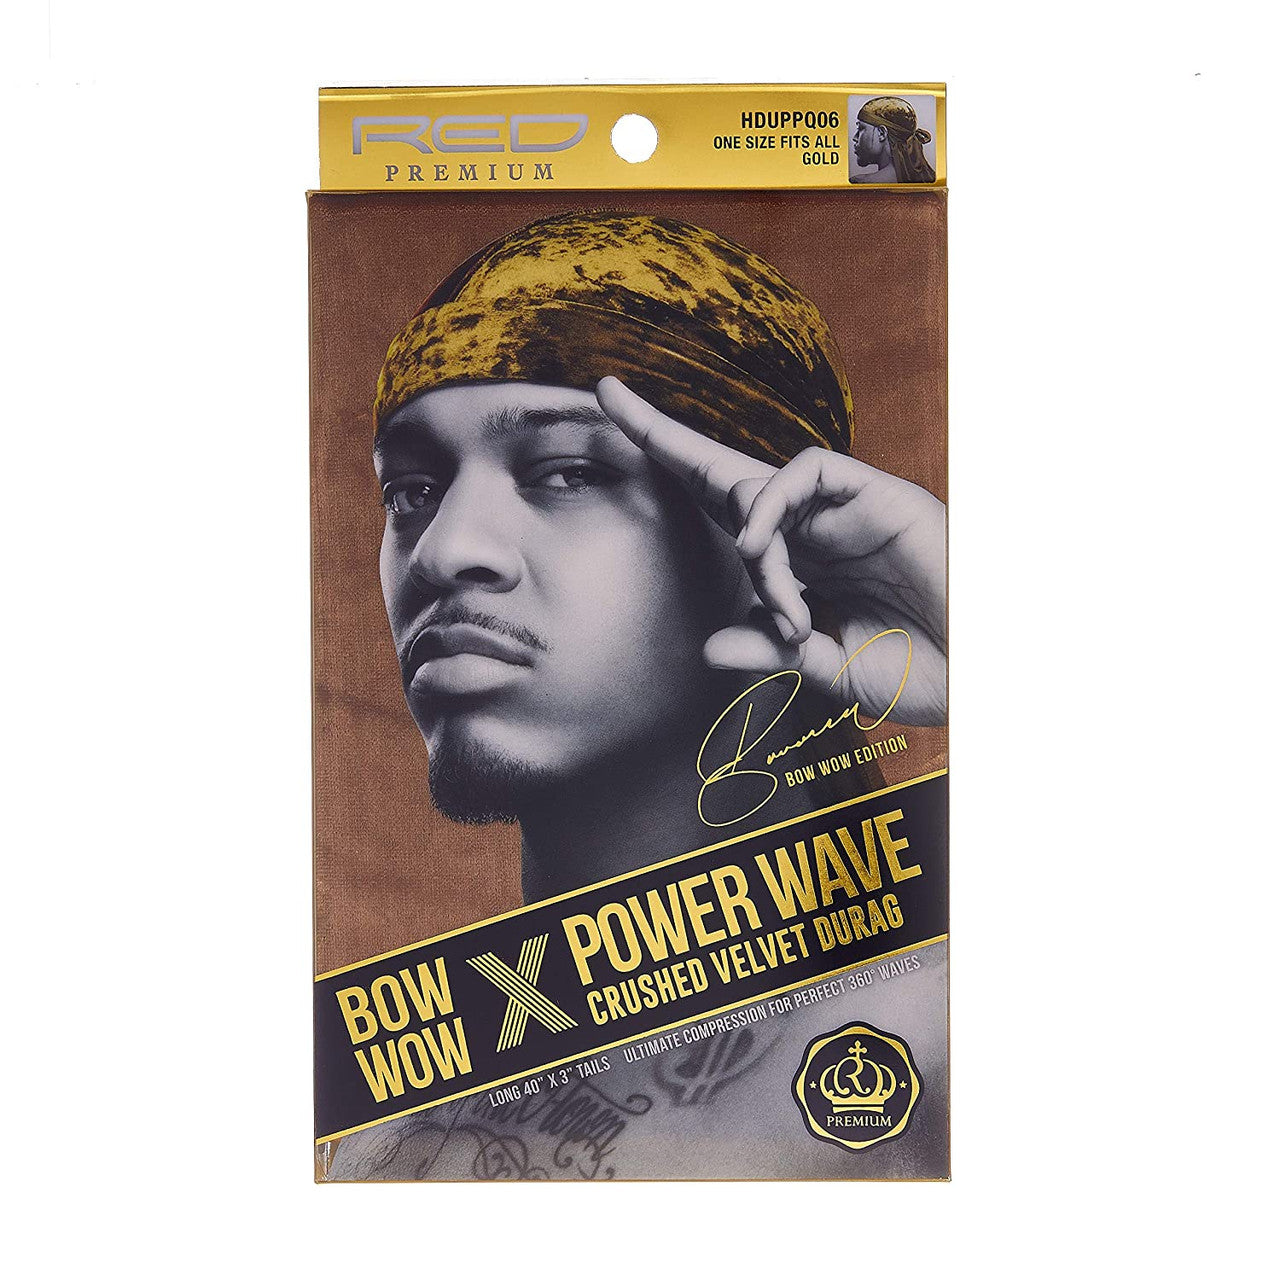 Red Premium Bow Wow X Power Wave Crushed Velvet Durag - Gold - #HDUPPQ06